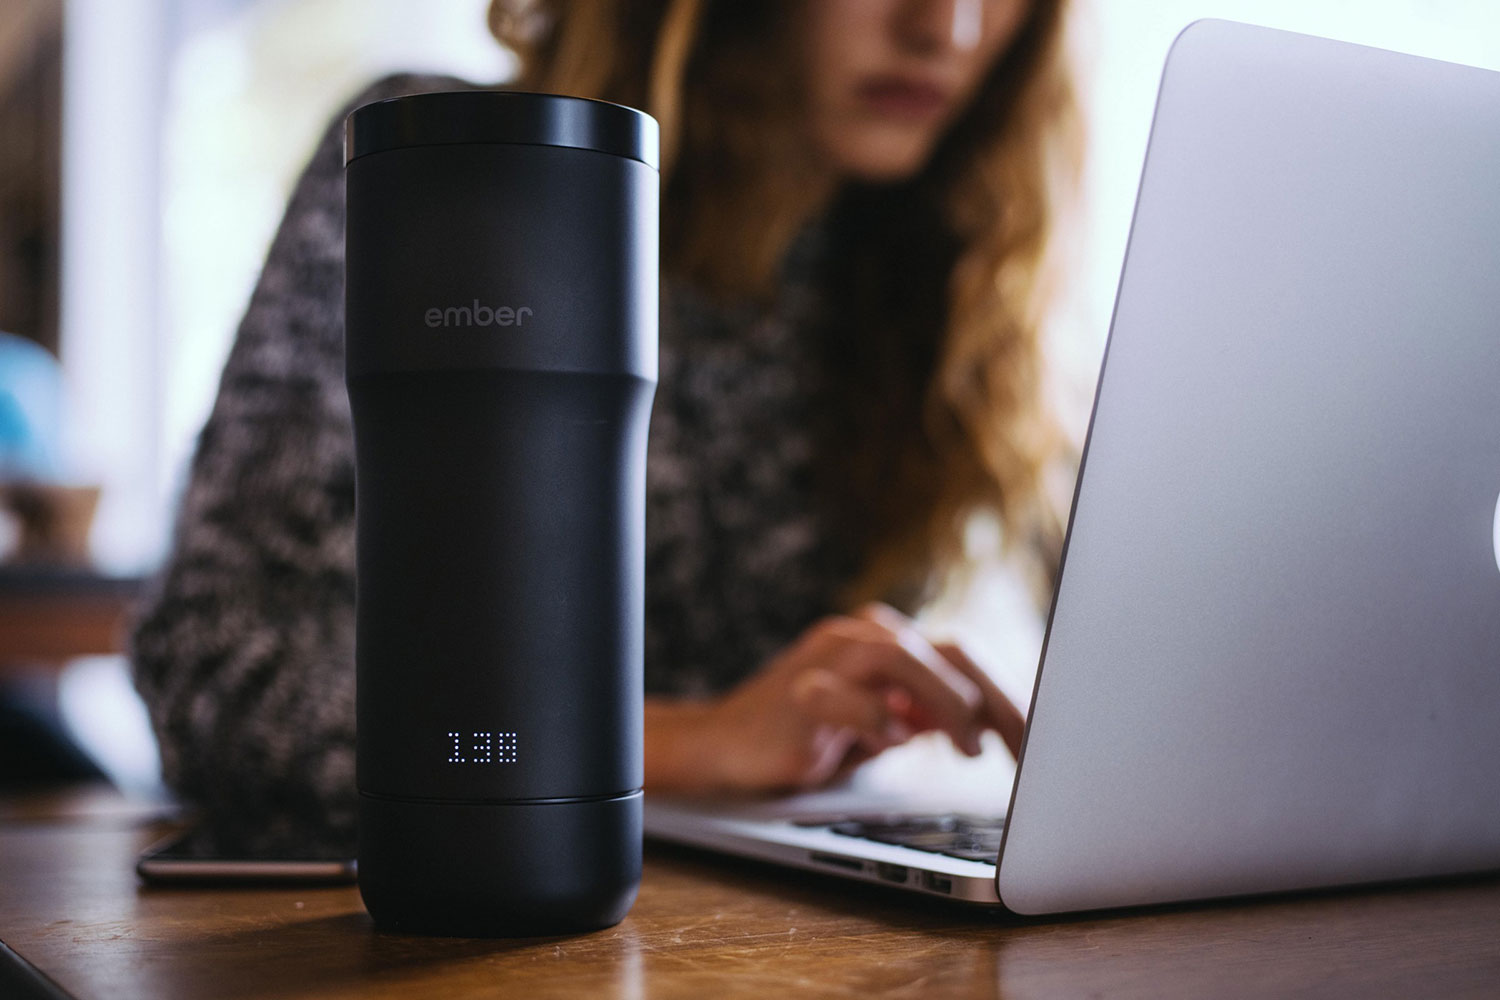 We Tried 3 Smart Mugs to See If They're Worth the Cost